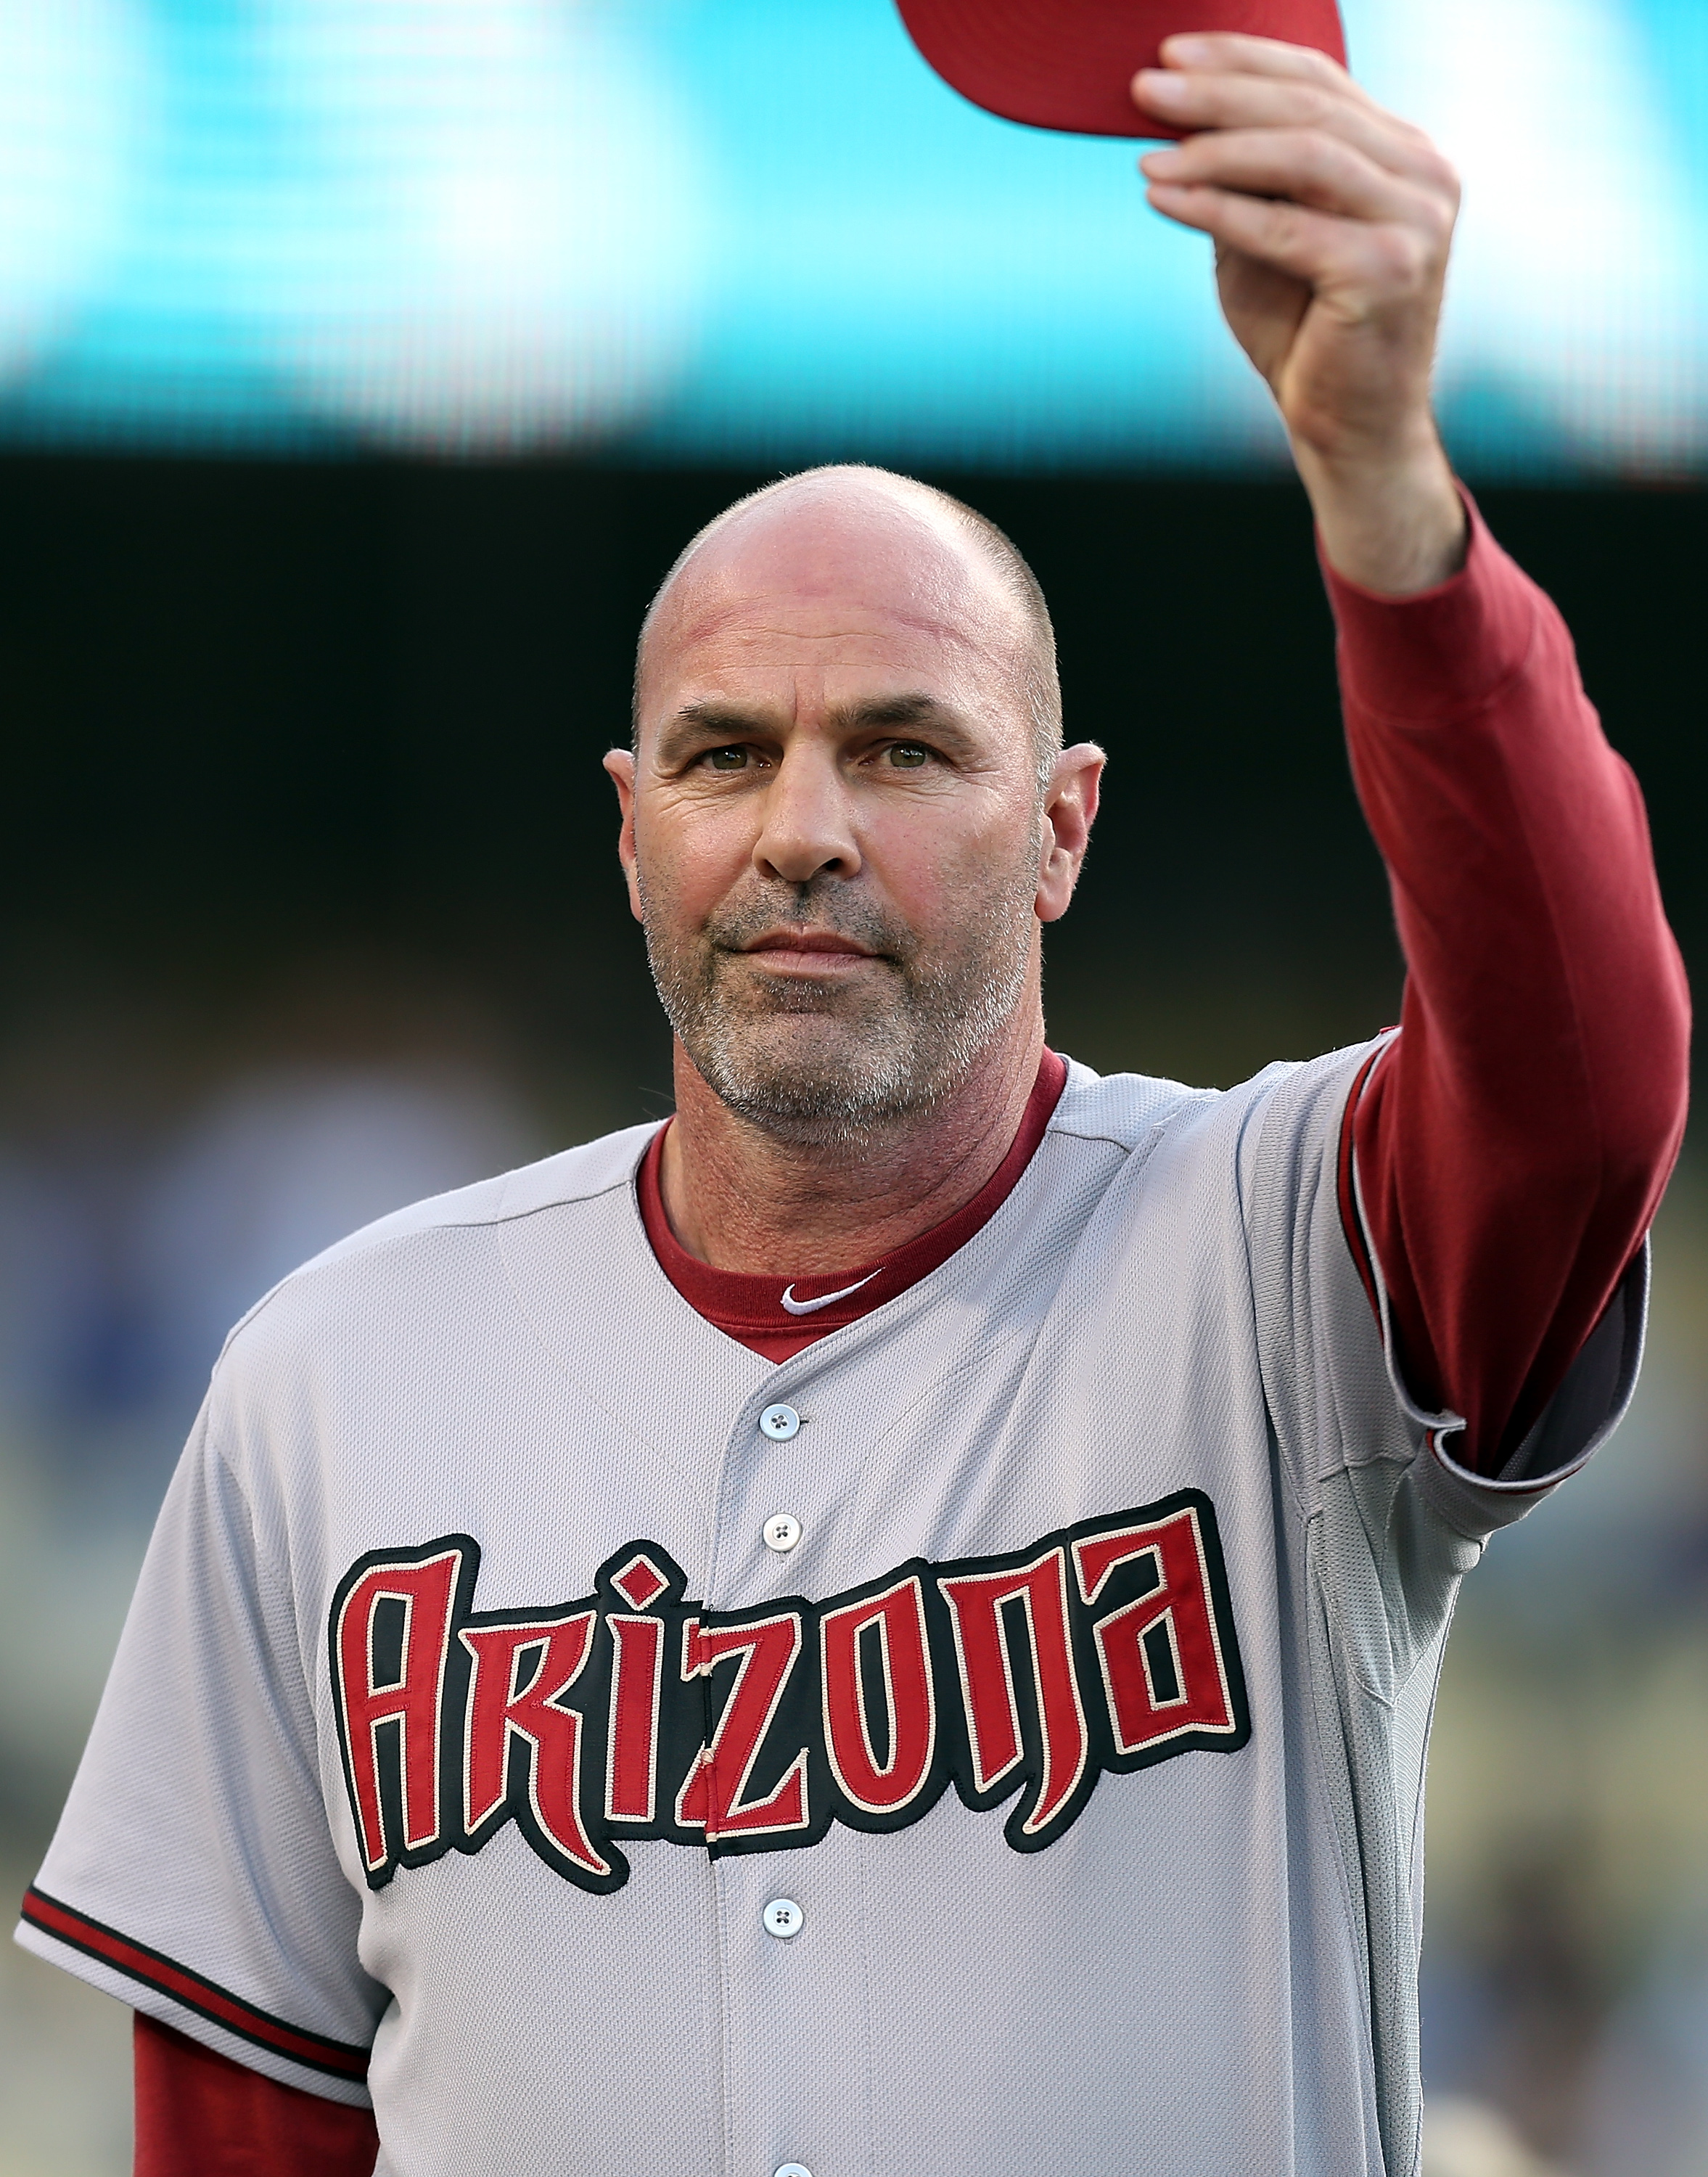 LOS ANGELES - JULY 31:  Arizona Diamondbacks manager Kirk Gibson salutes the crowd before a game against the Los Angeles Dodgers on Kirk Gibson Bobblehead Night at Dodger Stadium on July 31, 2012 in Los Angeles, California. (Photo by Josh Hedges/Getty Ima